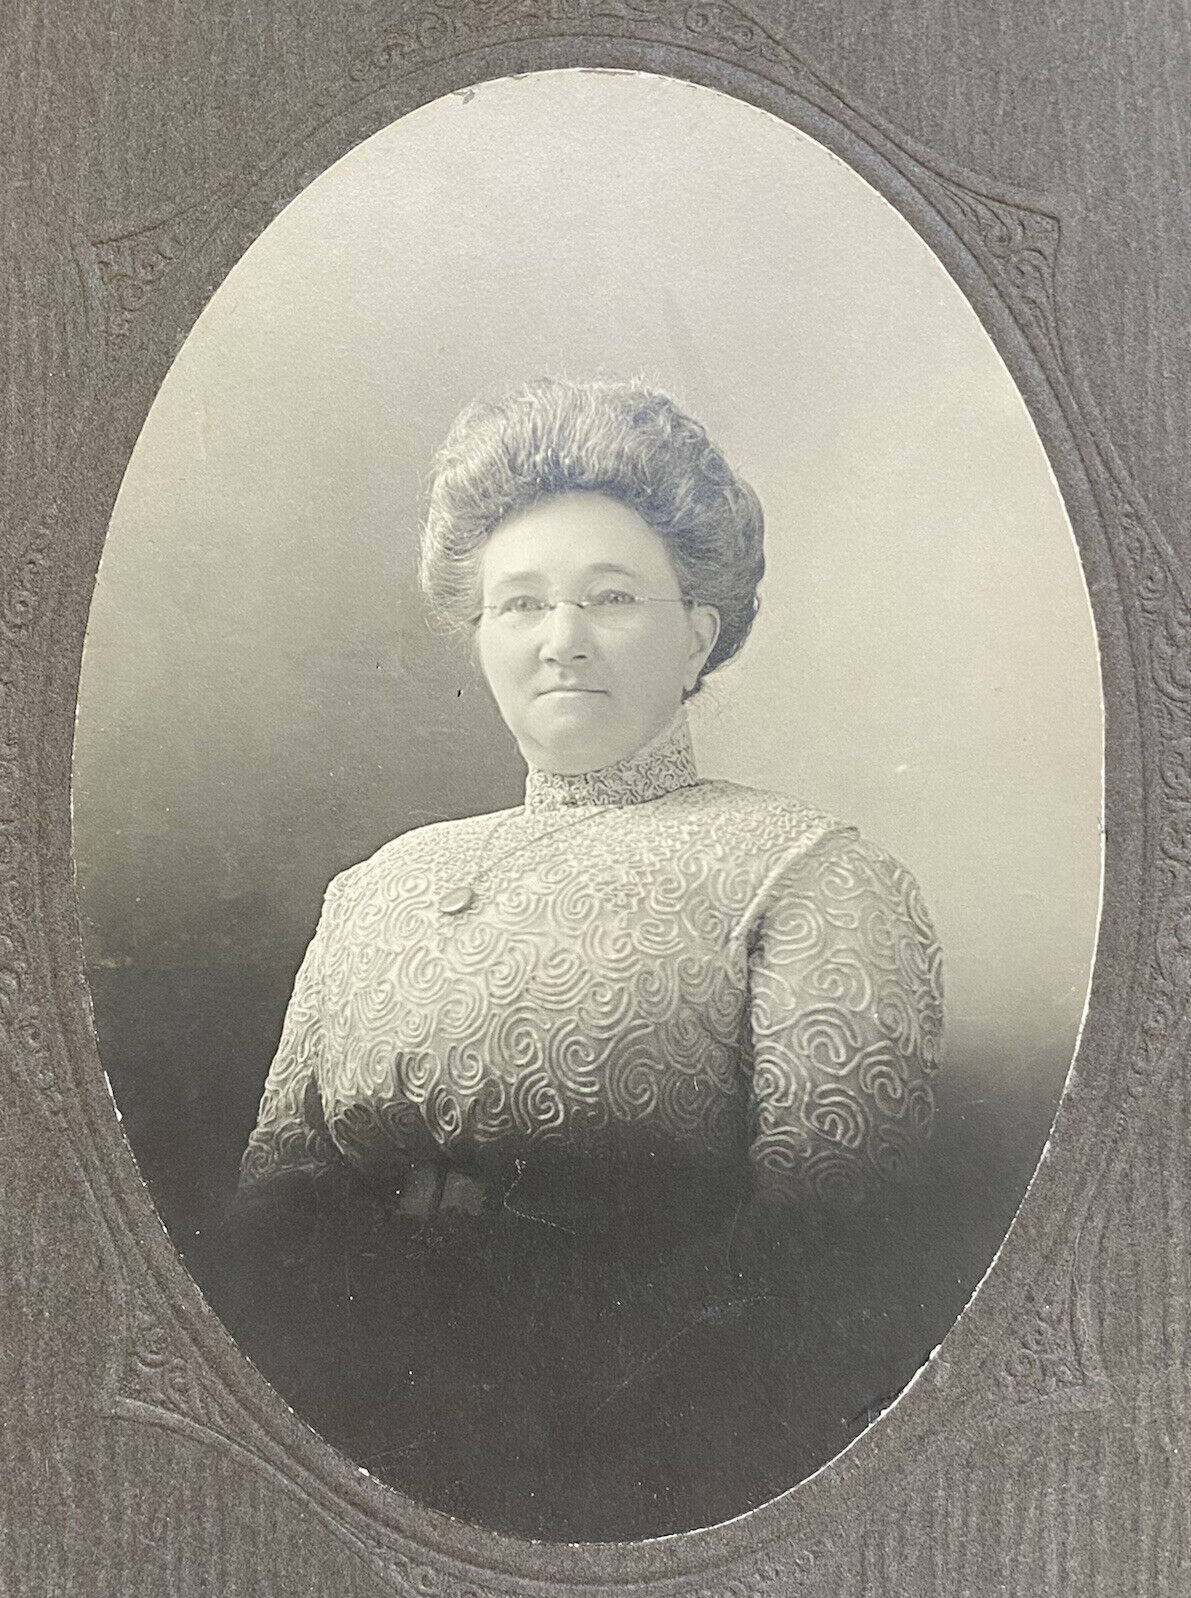 New Hampshire Older Woman with Glasses Antique Photo Portrait Cabinet Card